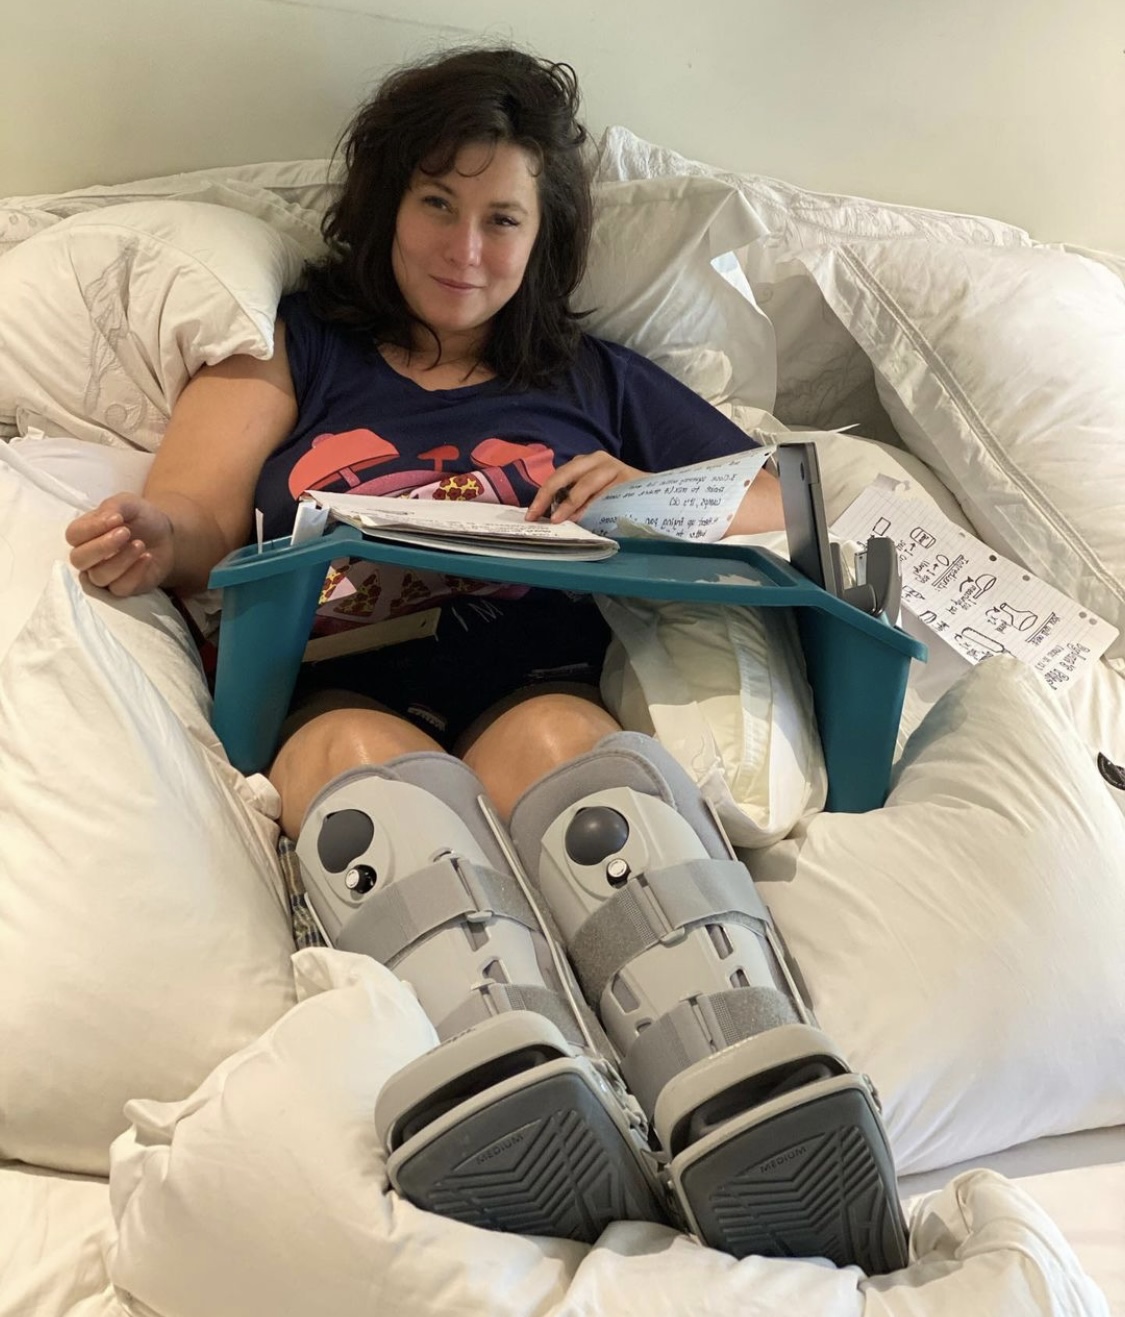 Elly-May in a hospital bed writing, wearing boots on both legs.